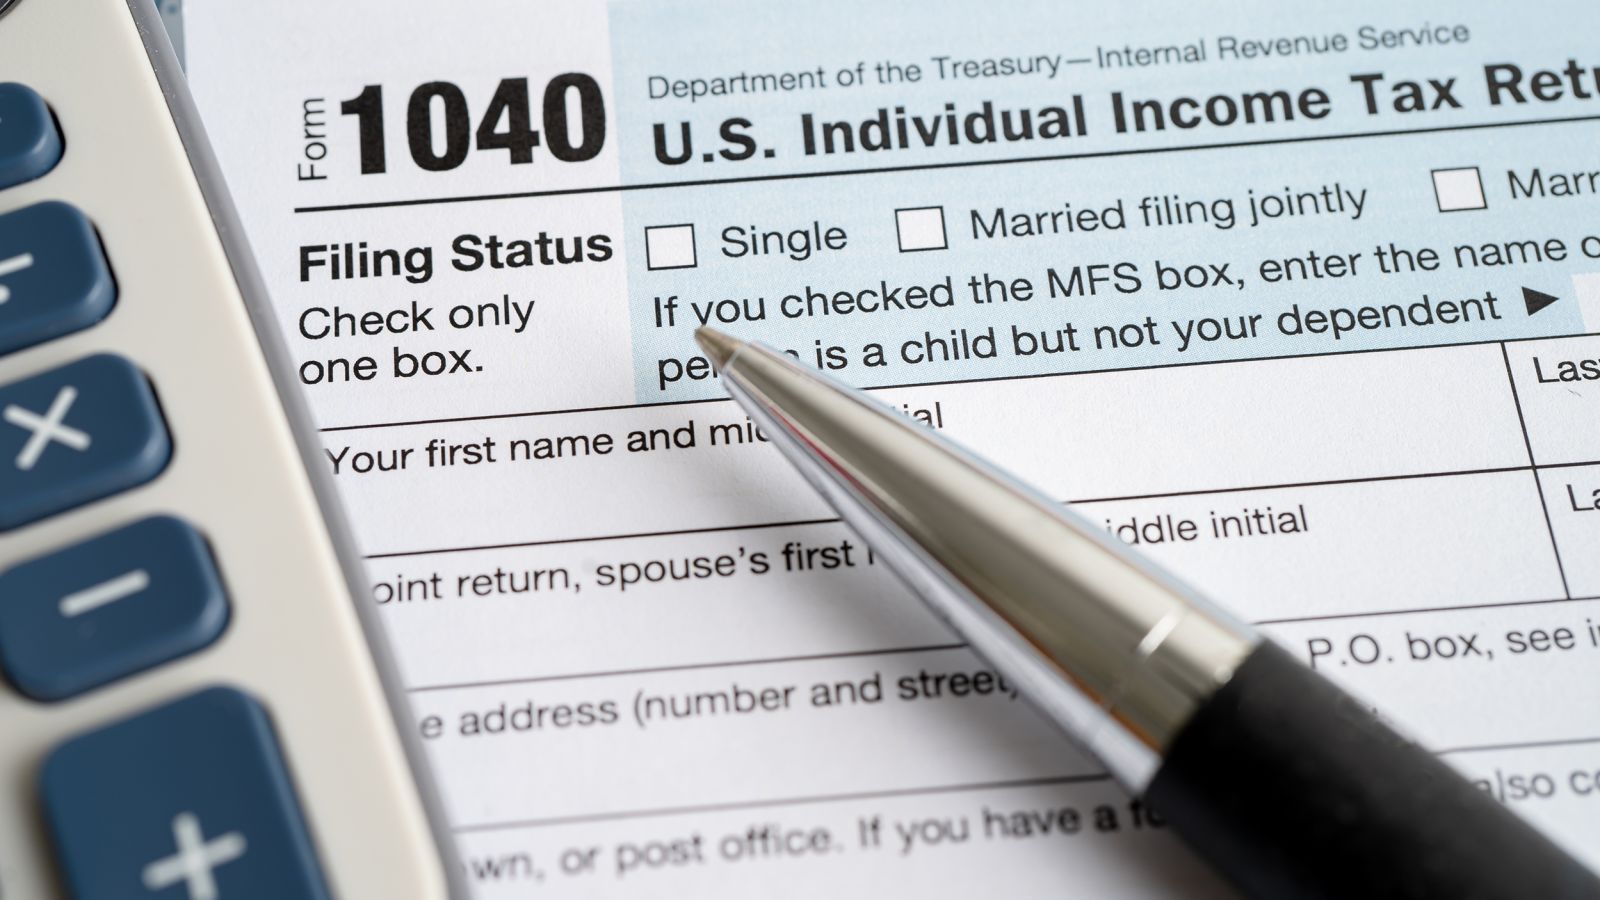 IRS Announces New Income Tax Limits